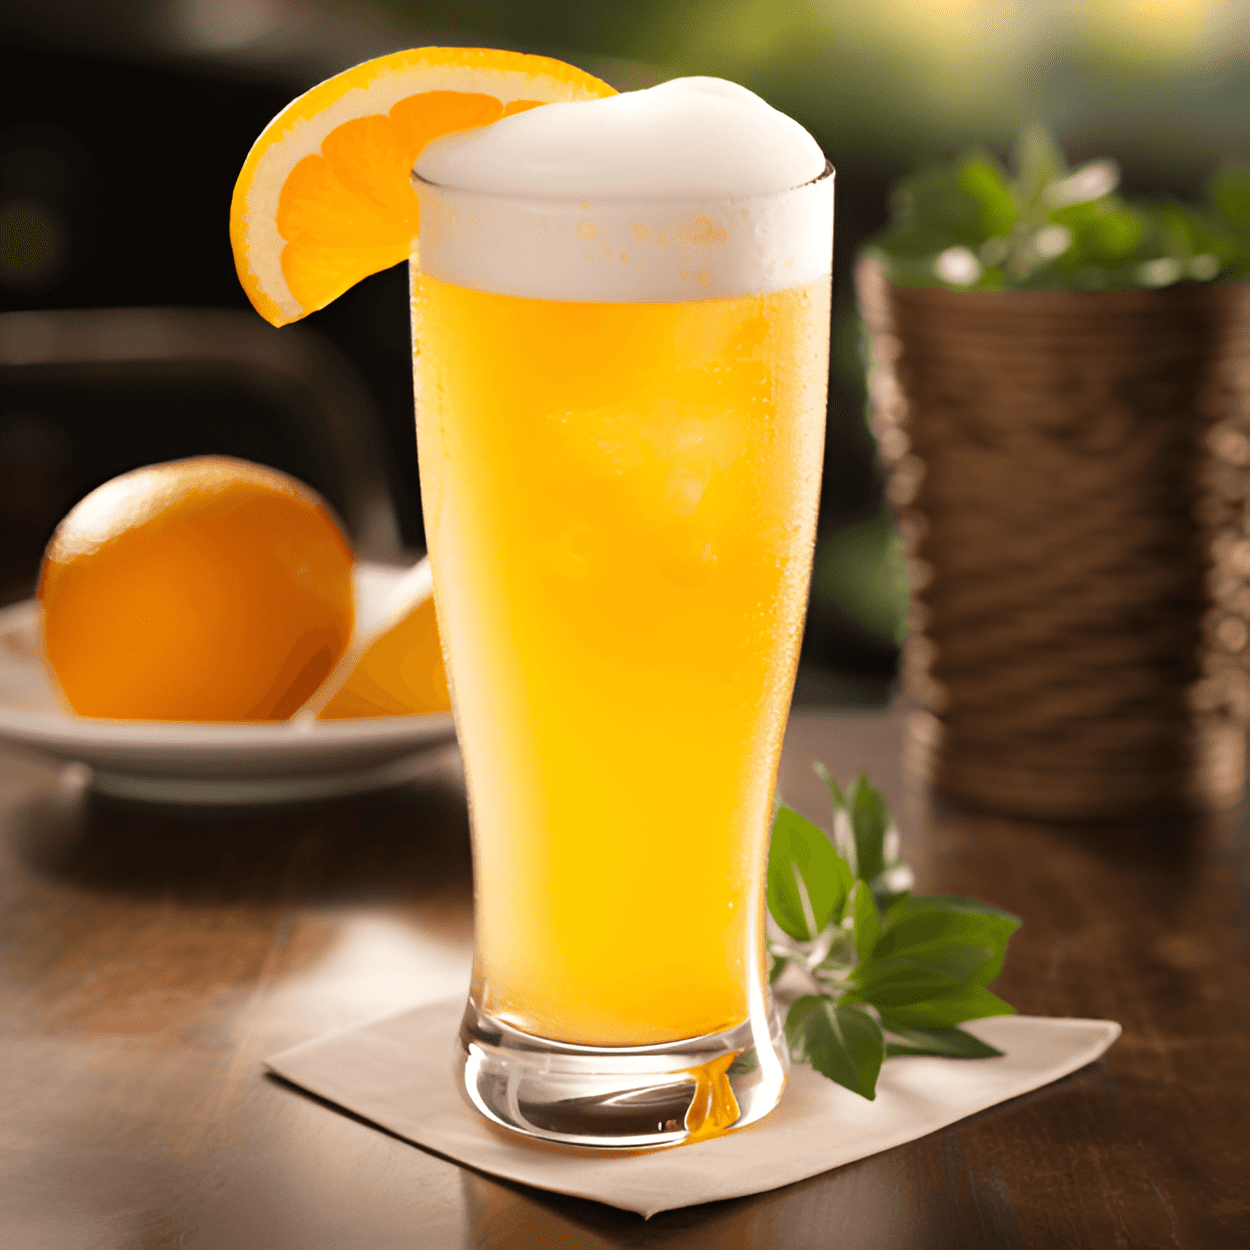 Manmosa Cocktail Recipe - The Manmosa is a refreshing, full-bodied cocktail with a strong beer base. The orange juice adds a sweet, citrusy note that balances out the bitterness of the beer. It's a robust, hearty drink with a smooth finish.